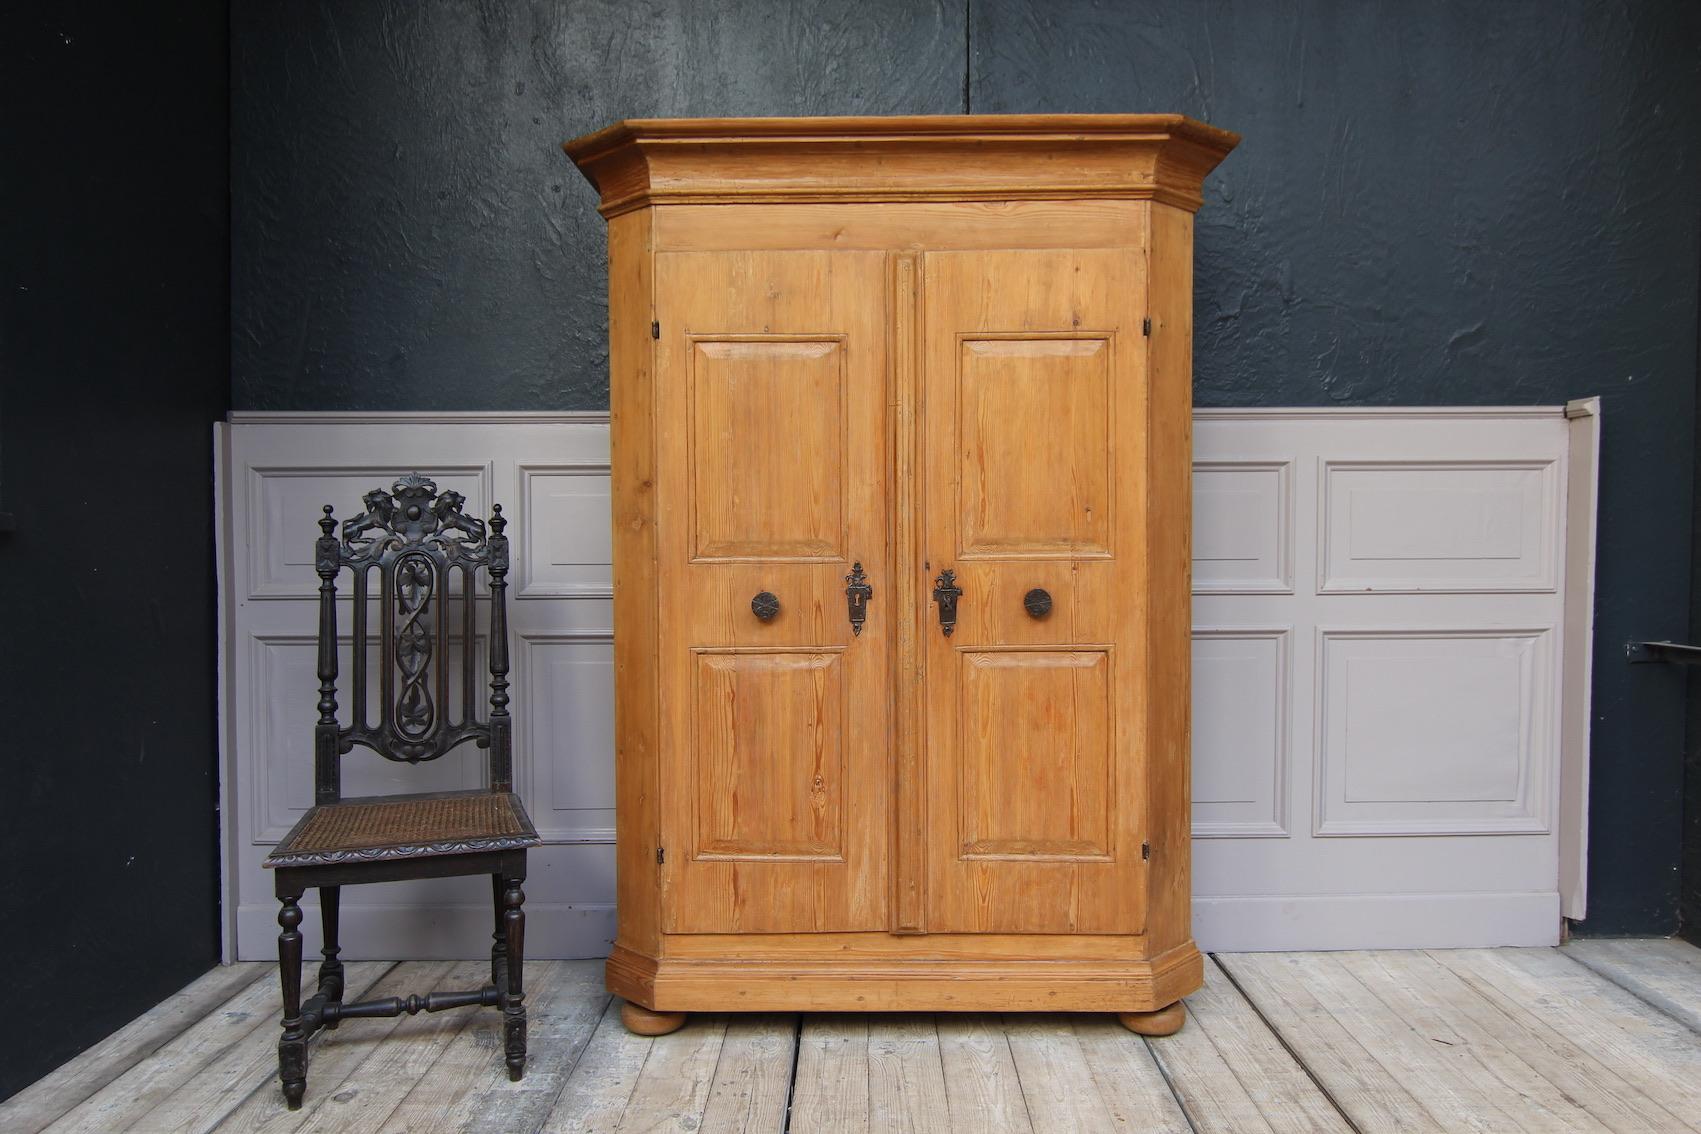 Southern German 18th-century baroque cabinet. Made of pine.
2-door body standing on 4 pressed ball feet with bevelled corners and protruding, profiled head strip. Doors on hand-forged iron hinges with the original hand-made lock (see photos). Solid